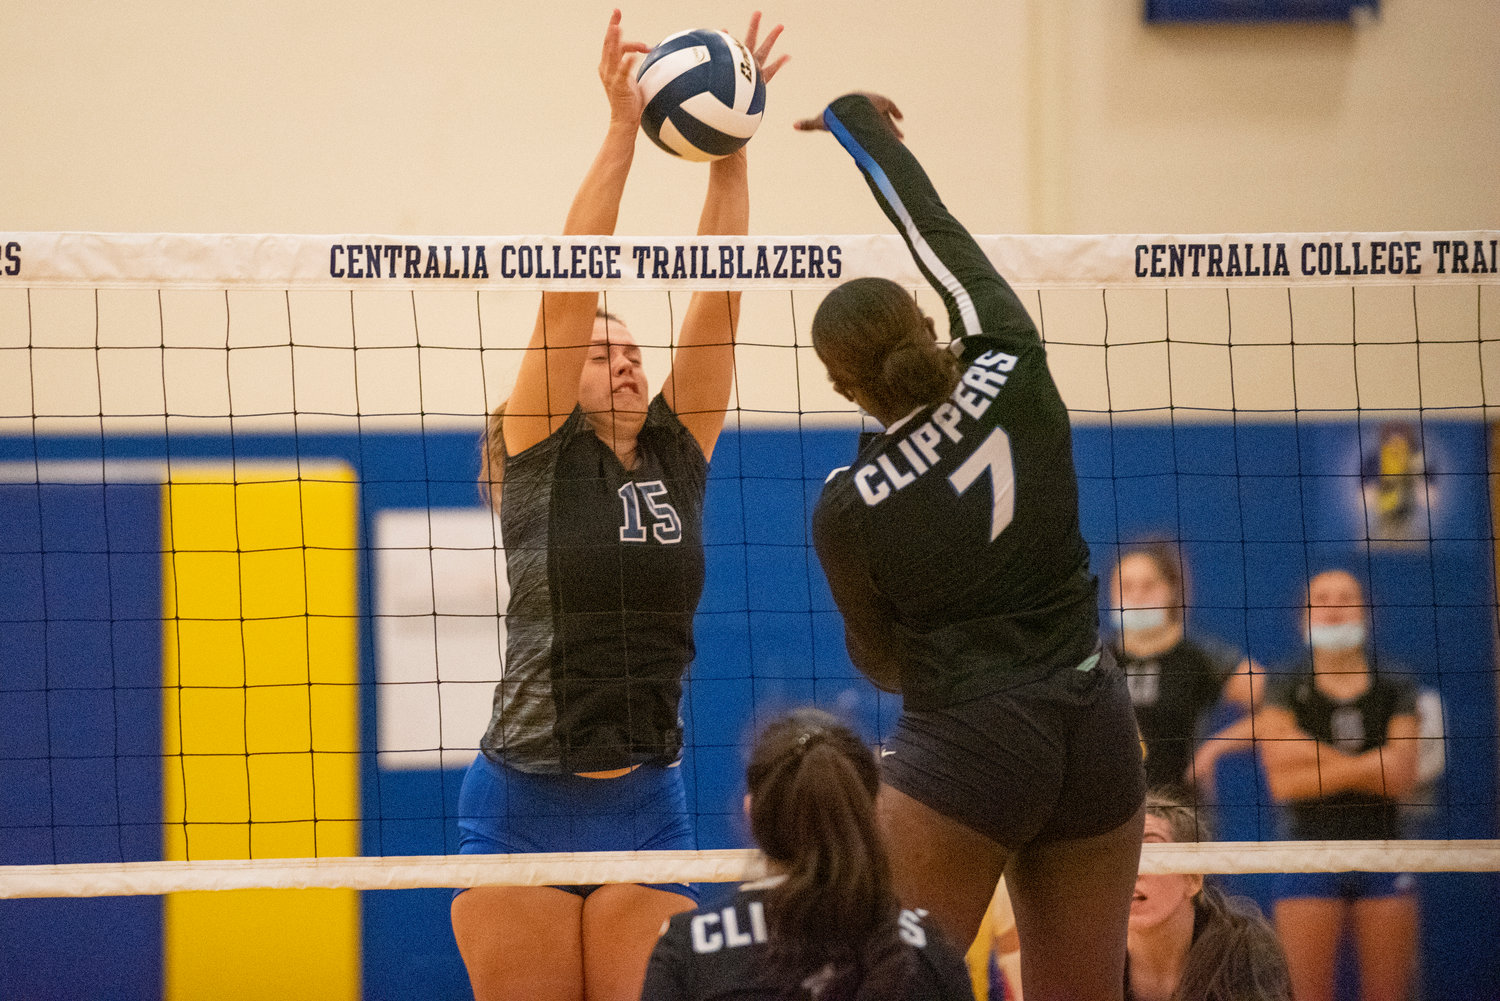 Centralia College's Ayzha Fuller (15) blocks a shot by South Puget Sound's Jahnessa Hill (7) during a match Wednesday in Centralia.